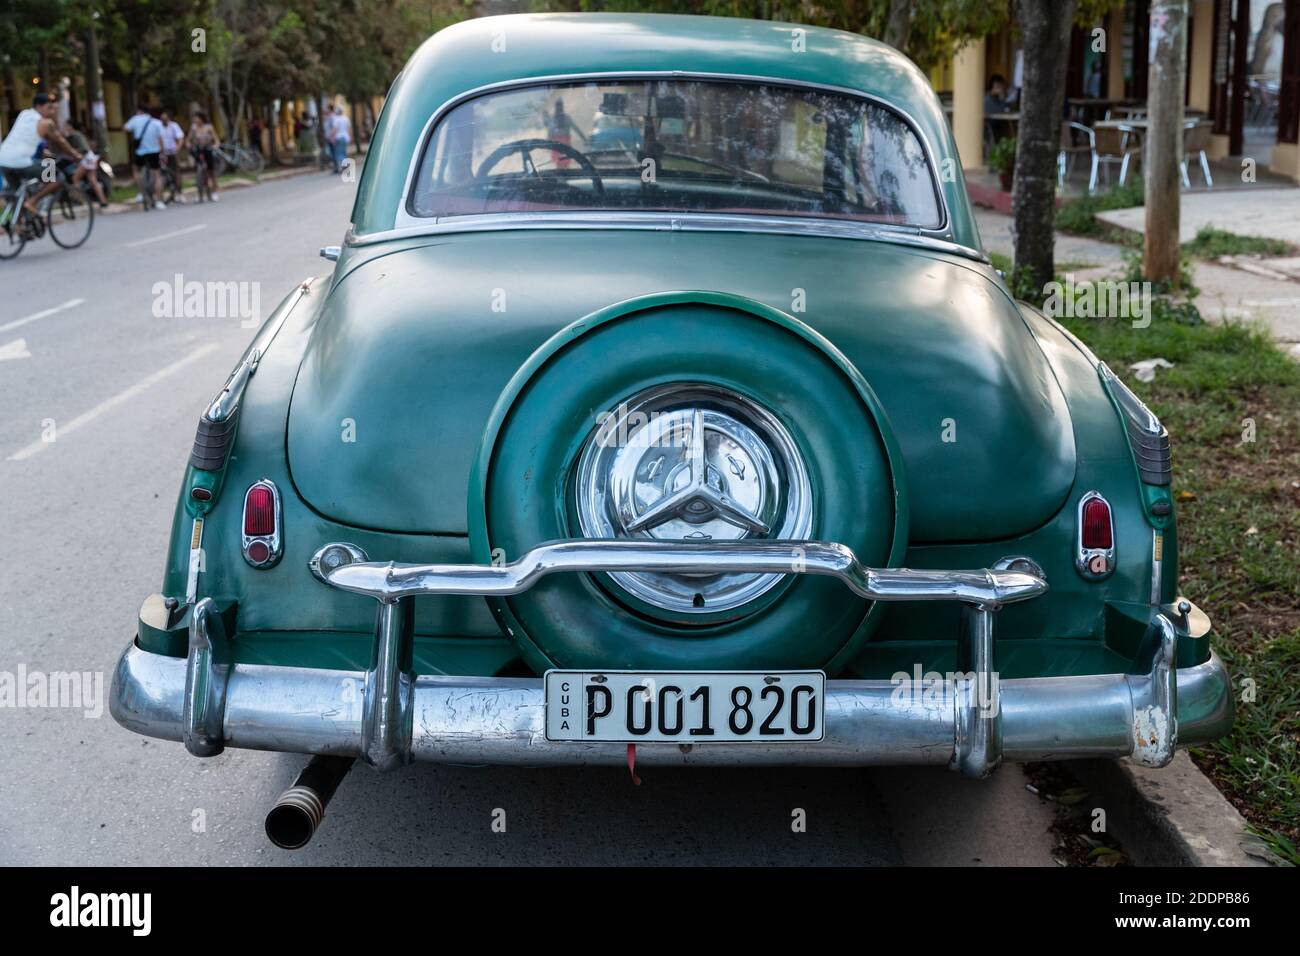 Vinales, Cuba-Feb 15, 2020: Old Vintage American car in Cuba.These classic automobiles are mainly used as a taxi and also rent for tourists. Stock Photo